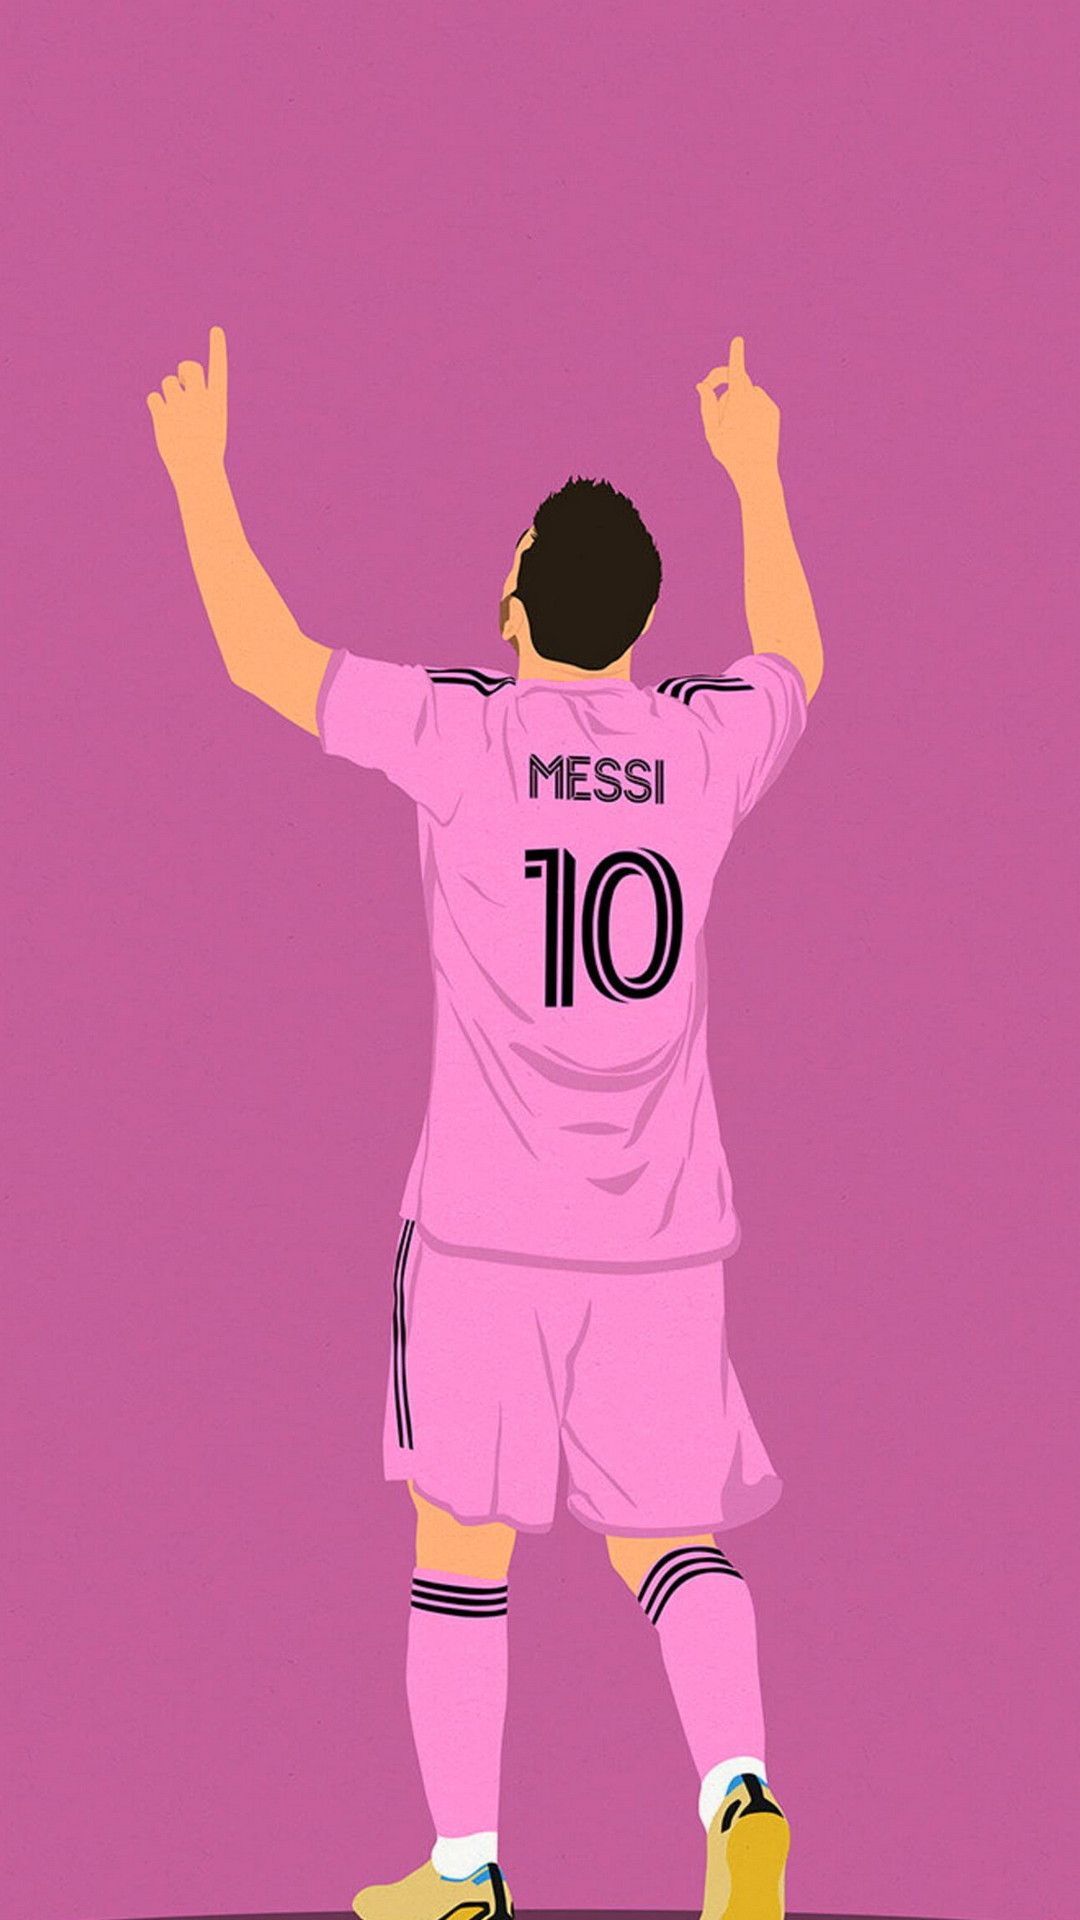 Lionel Messi wallpaper for iPhone with high-resolution 1080x1920 pixel. You can use this wallpaper for your iPhone 5, 6, 7, 8, X, XS, XR backgrounds, Mobile Screensaver, or iPad Lock Screen - Messi